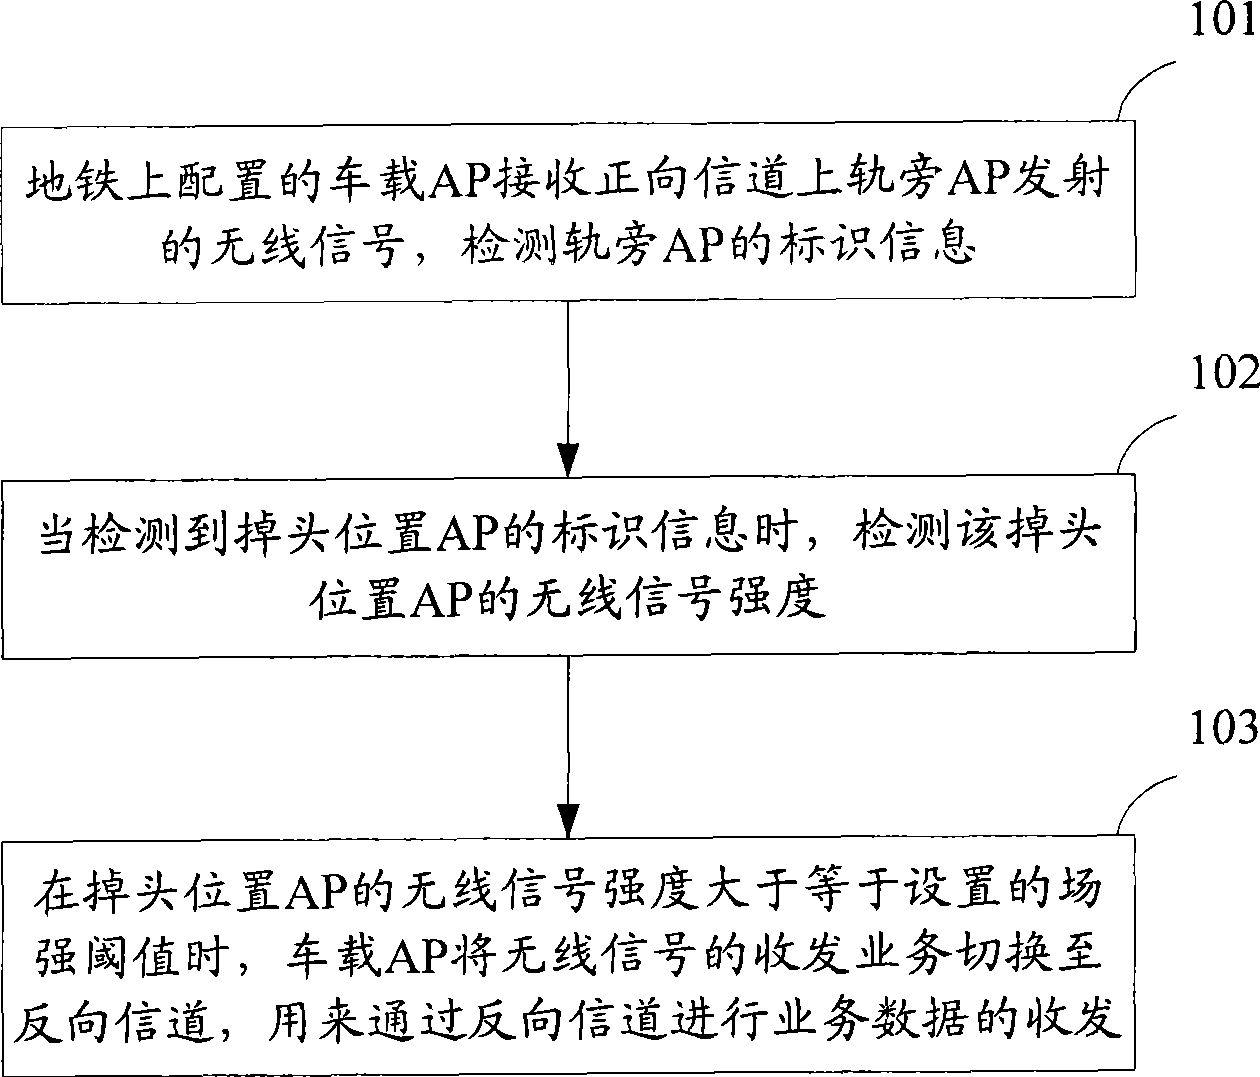 Channel switching method and vehicle-mounted wireless access point suitable for subway turning around